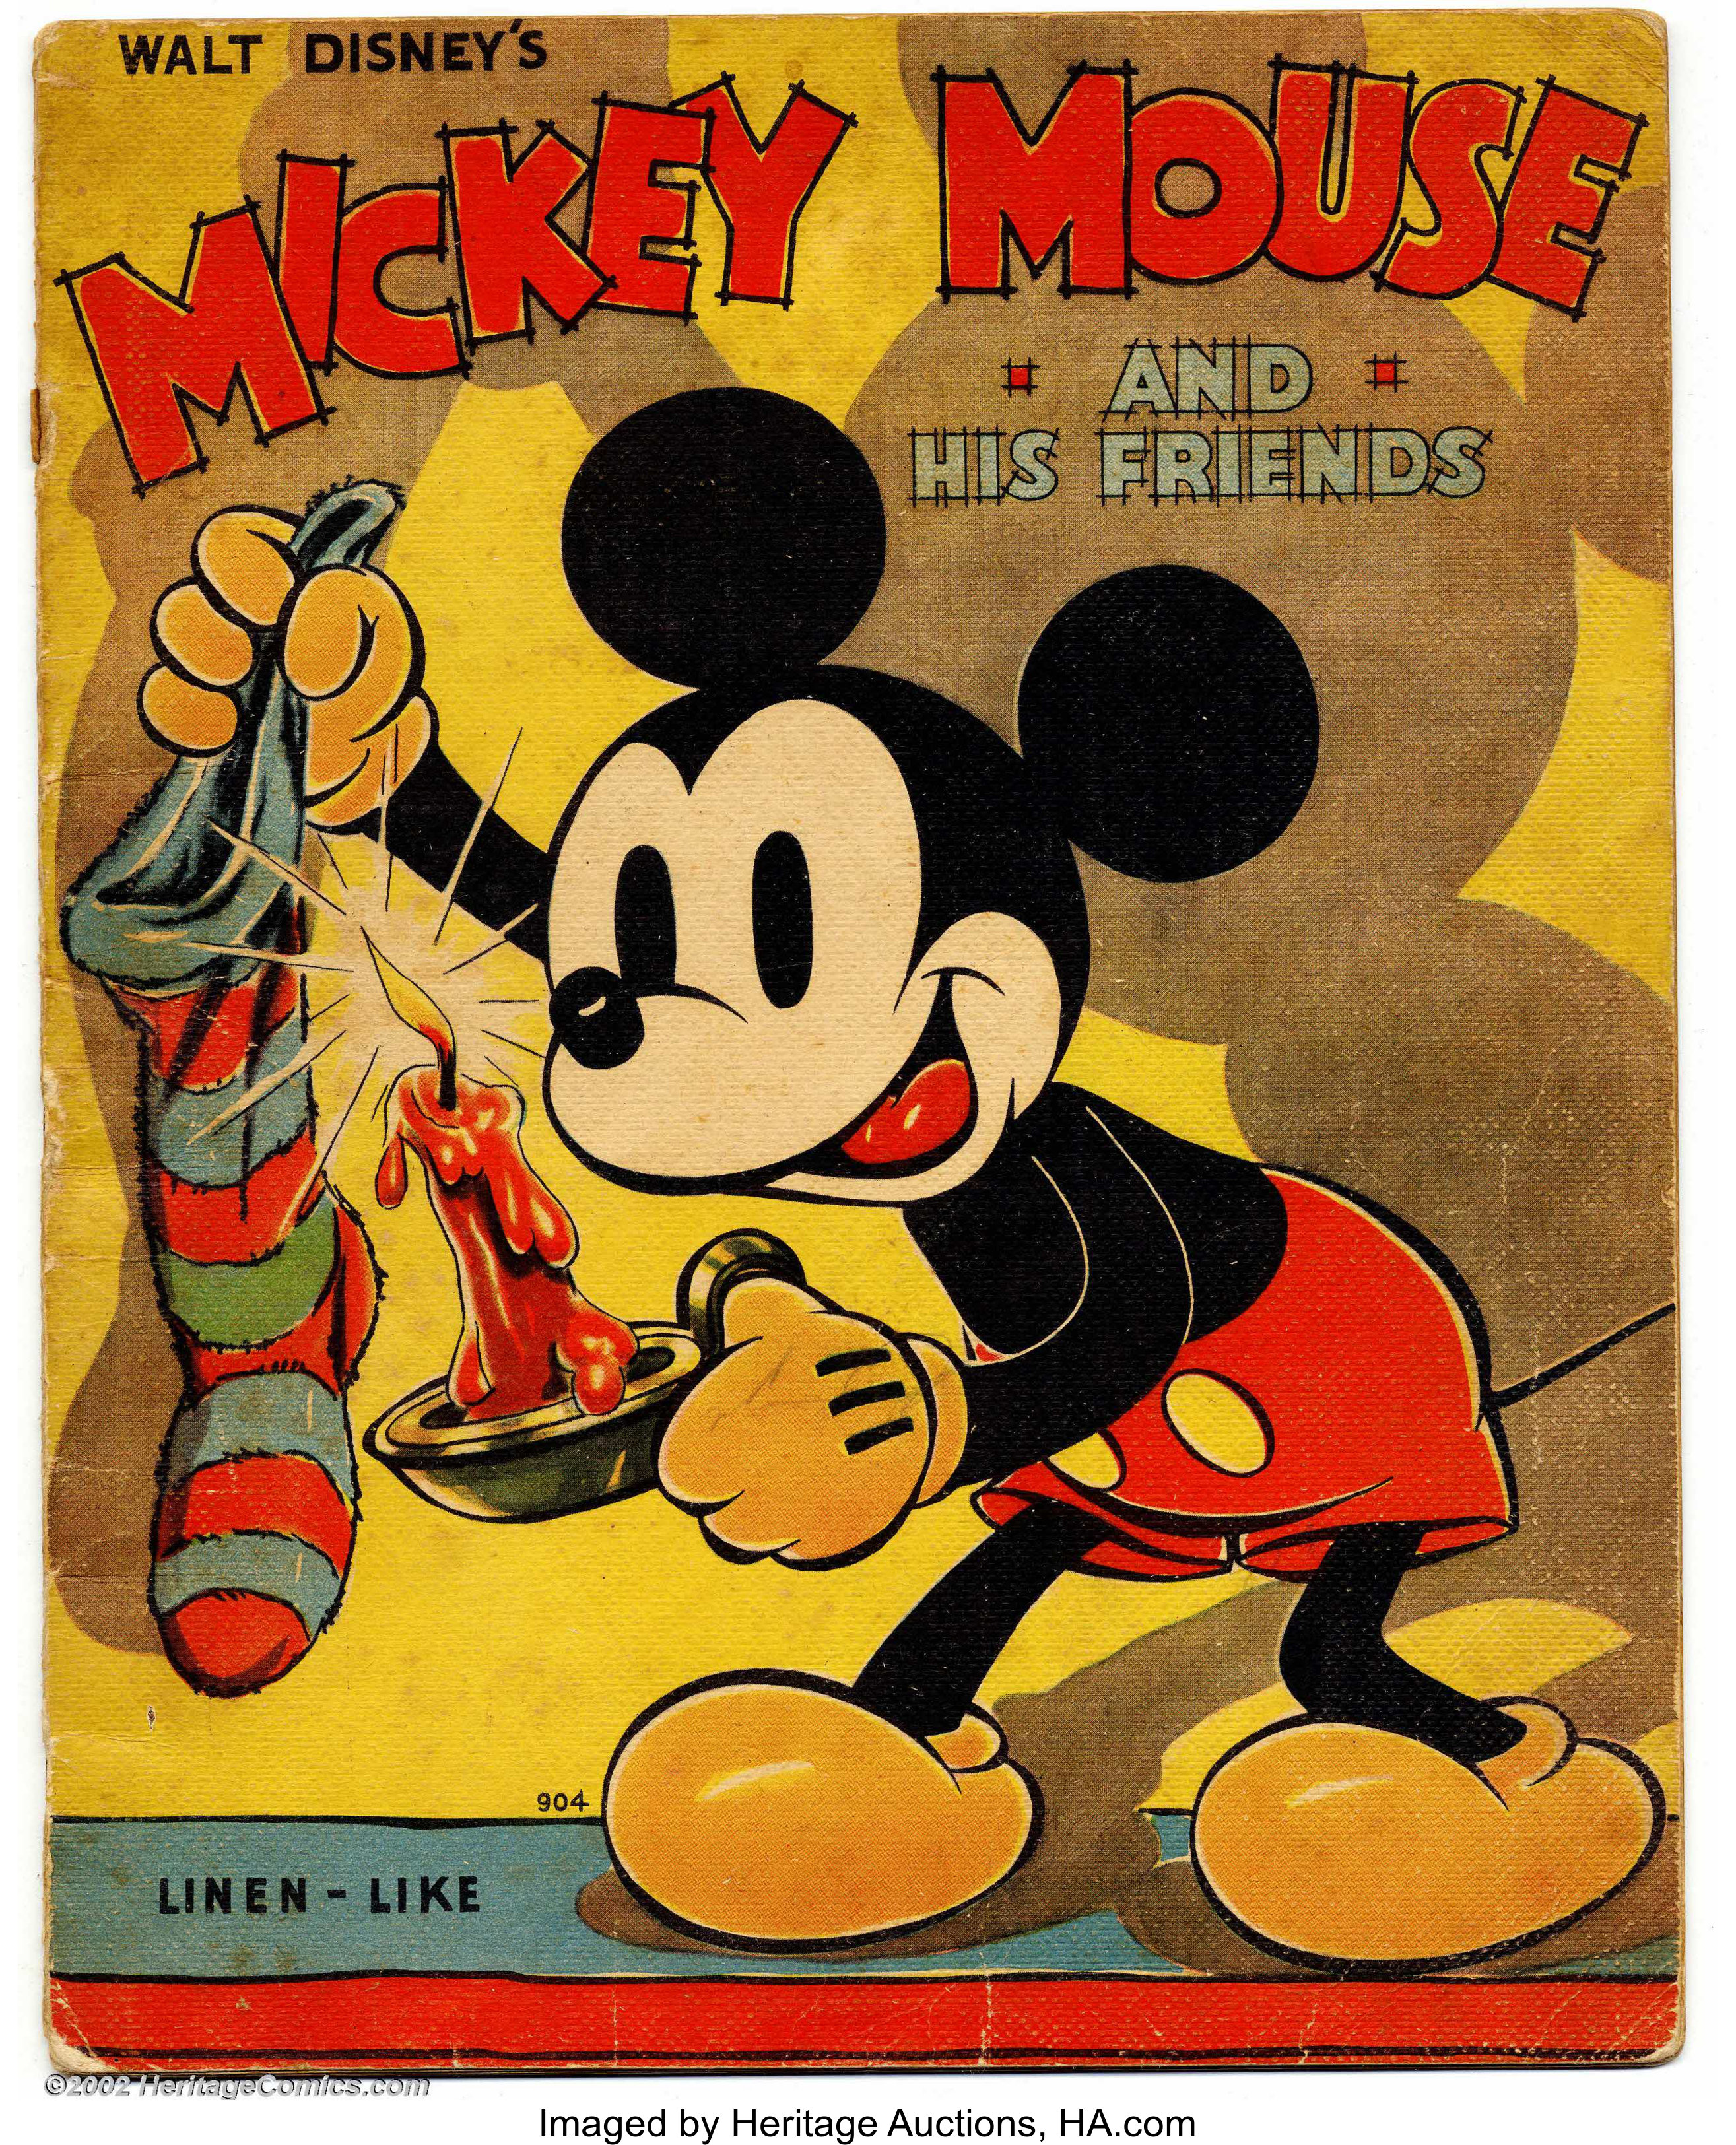 (Whitman, and Lot 1936). | of is #6291 Auctions | Mickey Mouse Mickey Heritage Friends one Mouse his